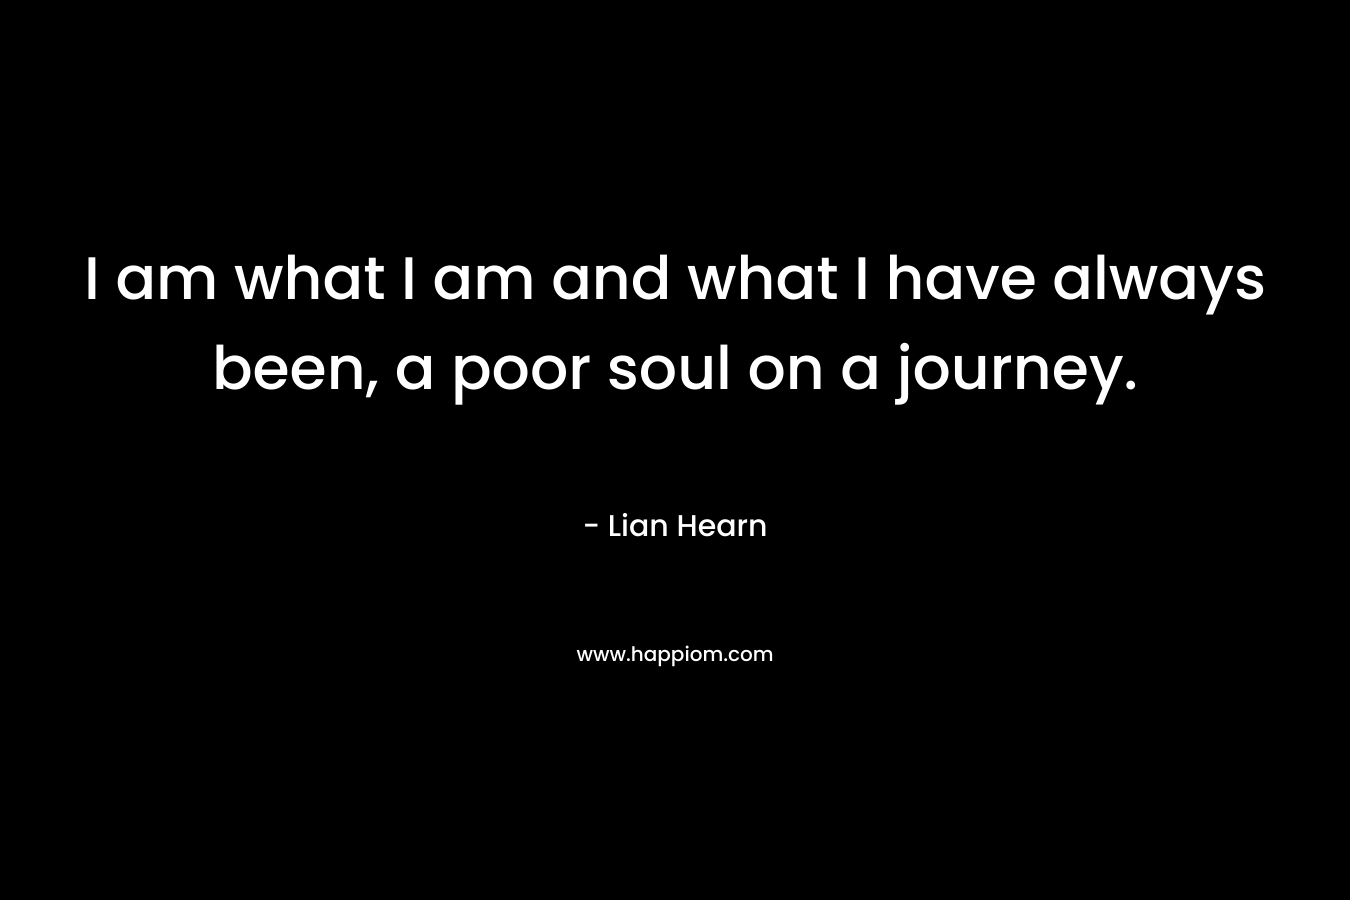 I am what I am and what I have always been, a poor soul on a journey. – Lian Hearn